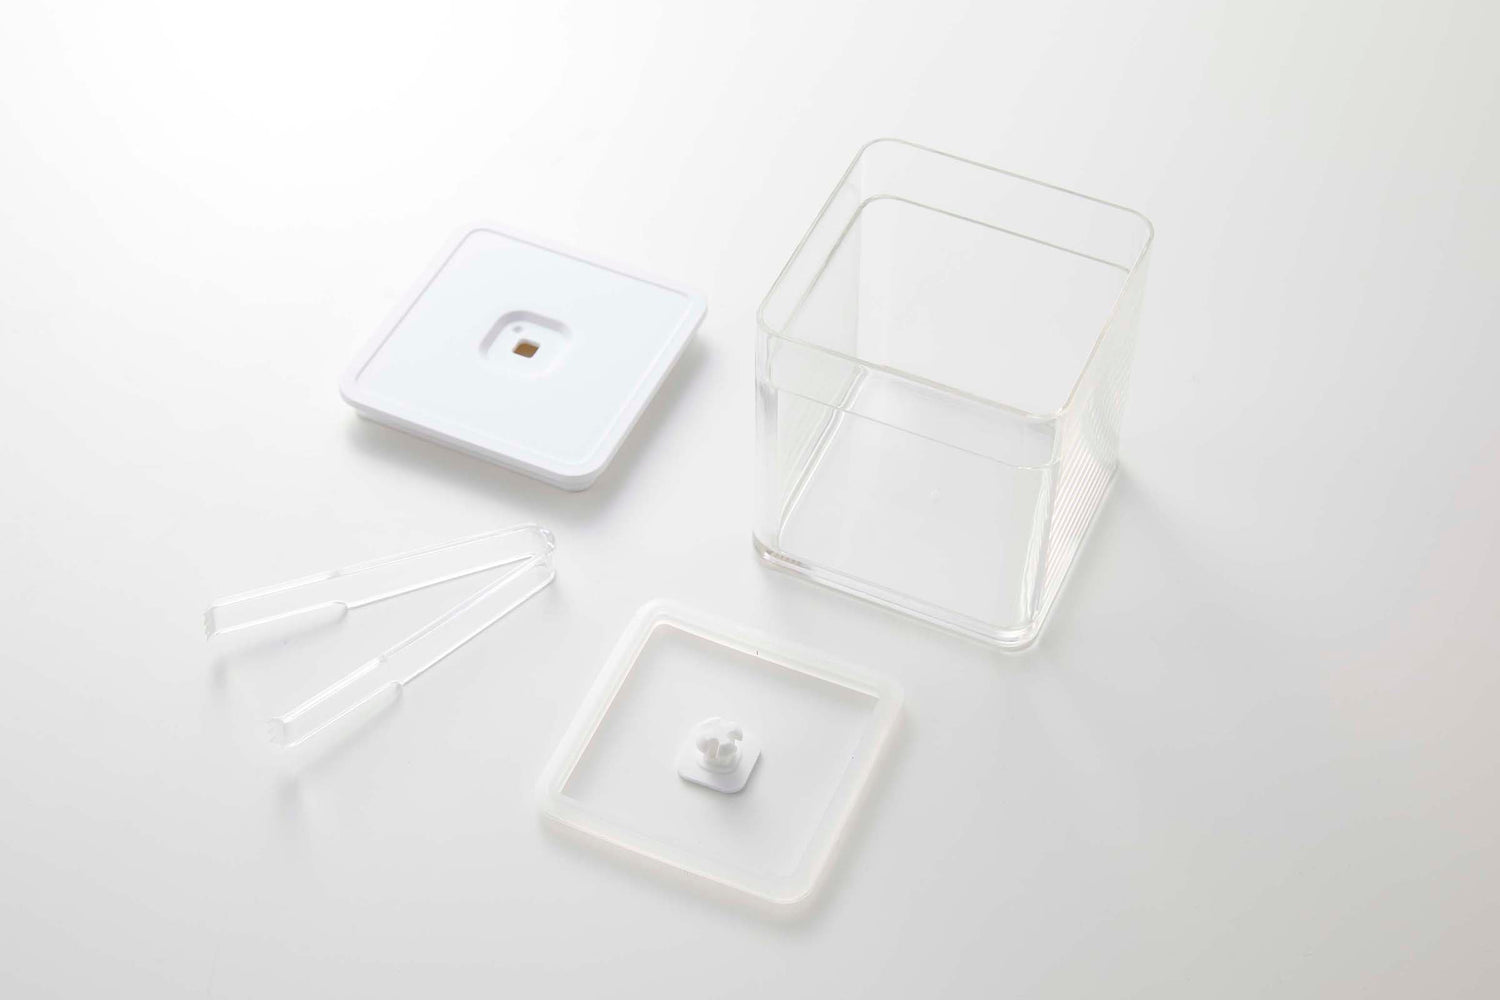 View 20 - Disassembled white Vacuum-Sealing Food Container w. Tongs on white background by Yamazaki Home.